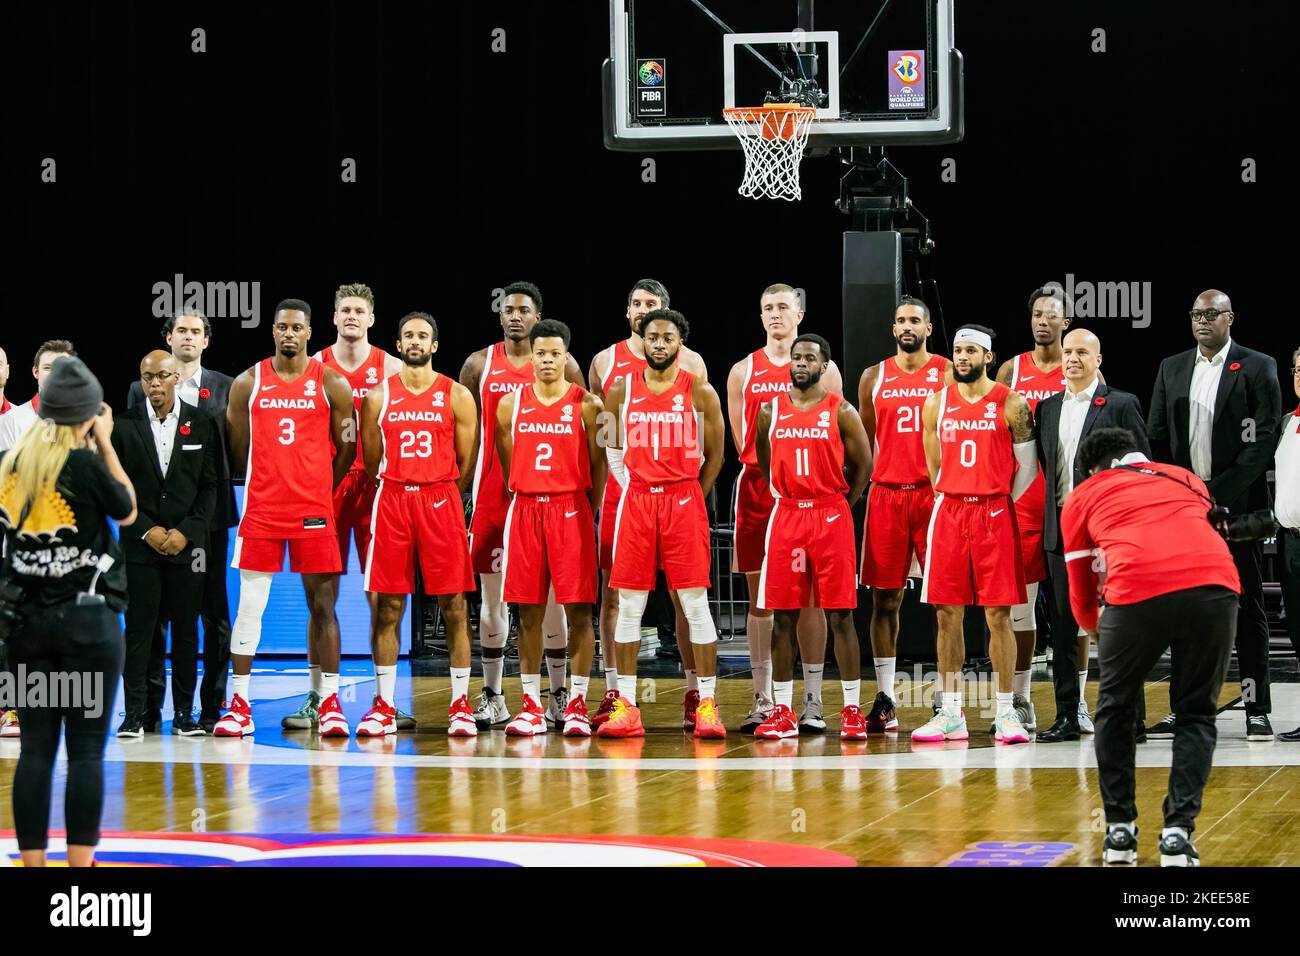 Edmonton, Canada. 10th Nov, 2022. The Canada team, (L to R, Front to Back)- Nate Mitchel (Coach)l, Melvin Ejim, Phil Scrubb, Trae Bell-Haynes, Aaron Best, Kenny Chery, Kassius Robertson, Nate Bjorkgren (Coach), Michael Meeks (Canada Basketball), Conor Morgan, Kalif Young, Owen Klassen, Thomas Kennedy, Thomas Scrubb, Jean-Victor Makuma.Canada defeats Venezuela 94-56 to qualify for the FIBA World Cup 2023. Canada Goose is now 9-0 in qualifying. (Photo by Ron Palmer/SOPA Images/Sipa USA) Credit: Sipa USA/Alamy Live News Stock Photo